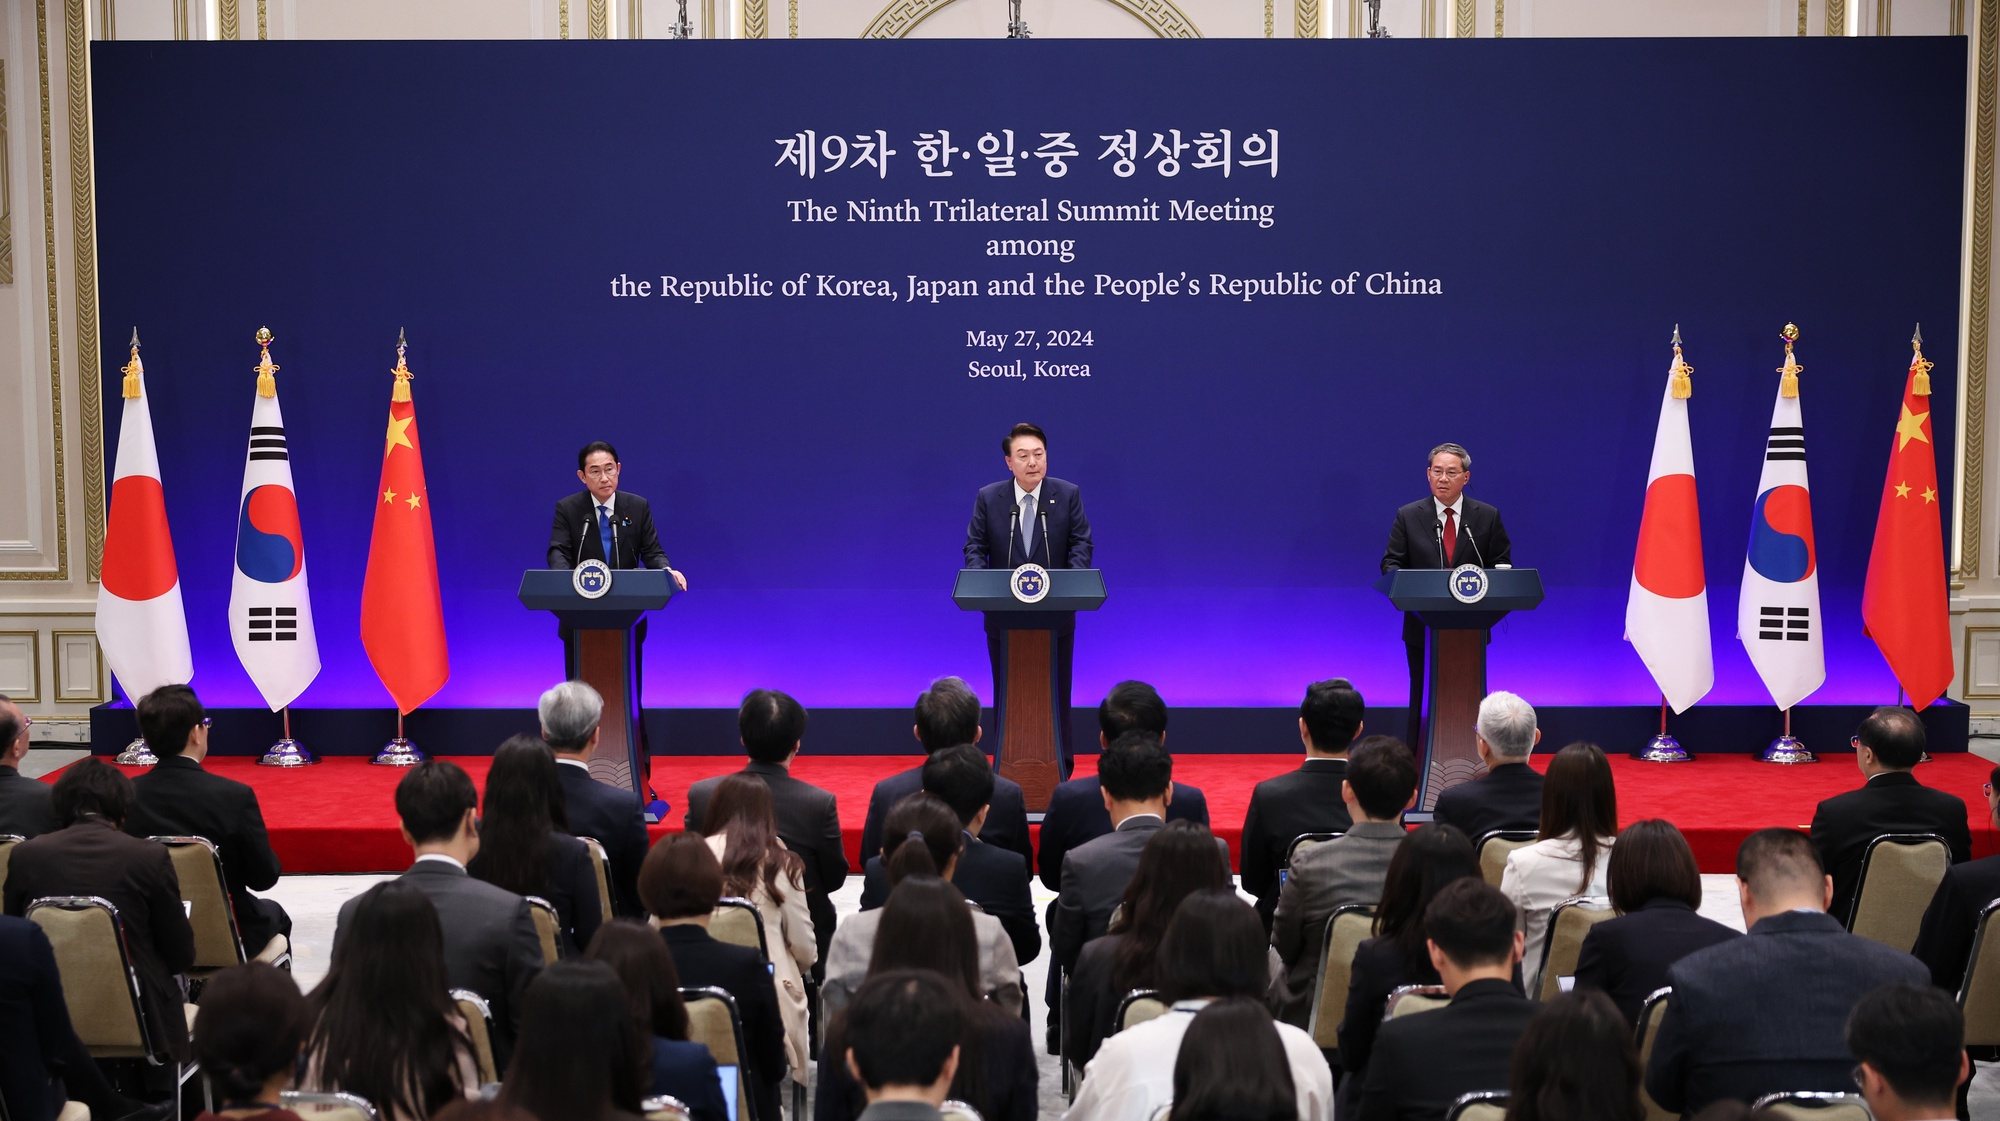 epa11372775 South Korean President Yoon Suk Yeol (C) speaks as Japanese Prime Minister Fumio Kishida (L) and Chinese Premier Li Qiang (R) listen during a joint news conference on the sidelines of the South Korea-China-Japan Trilateral Summit, in Seoul, South Korea, 27 May 2024.  EPA/KIM HONG-JI / POOL